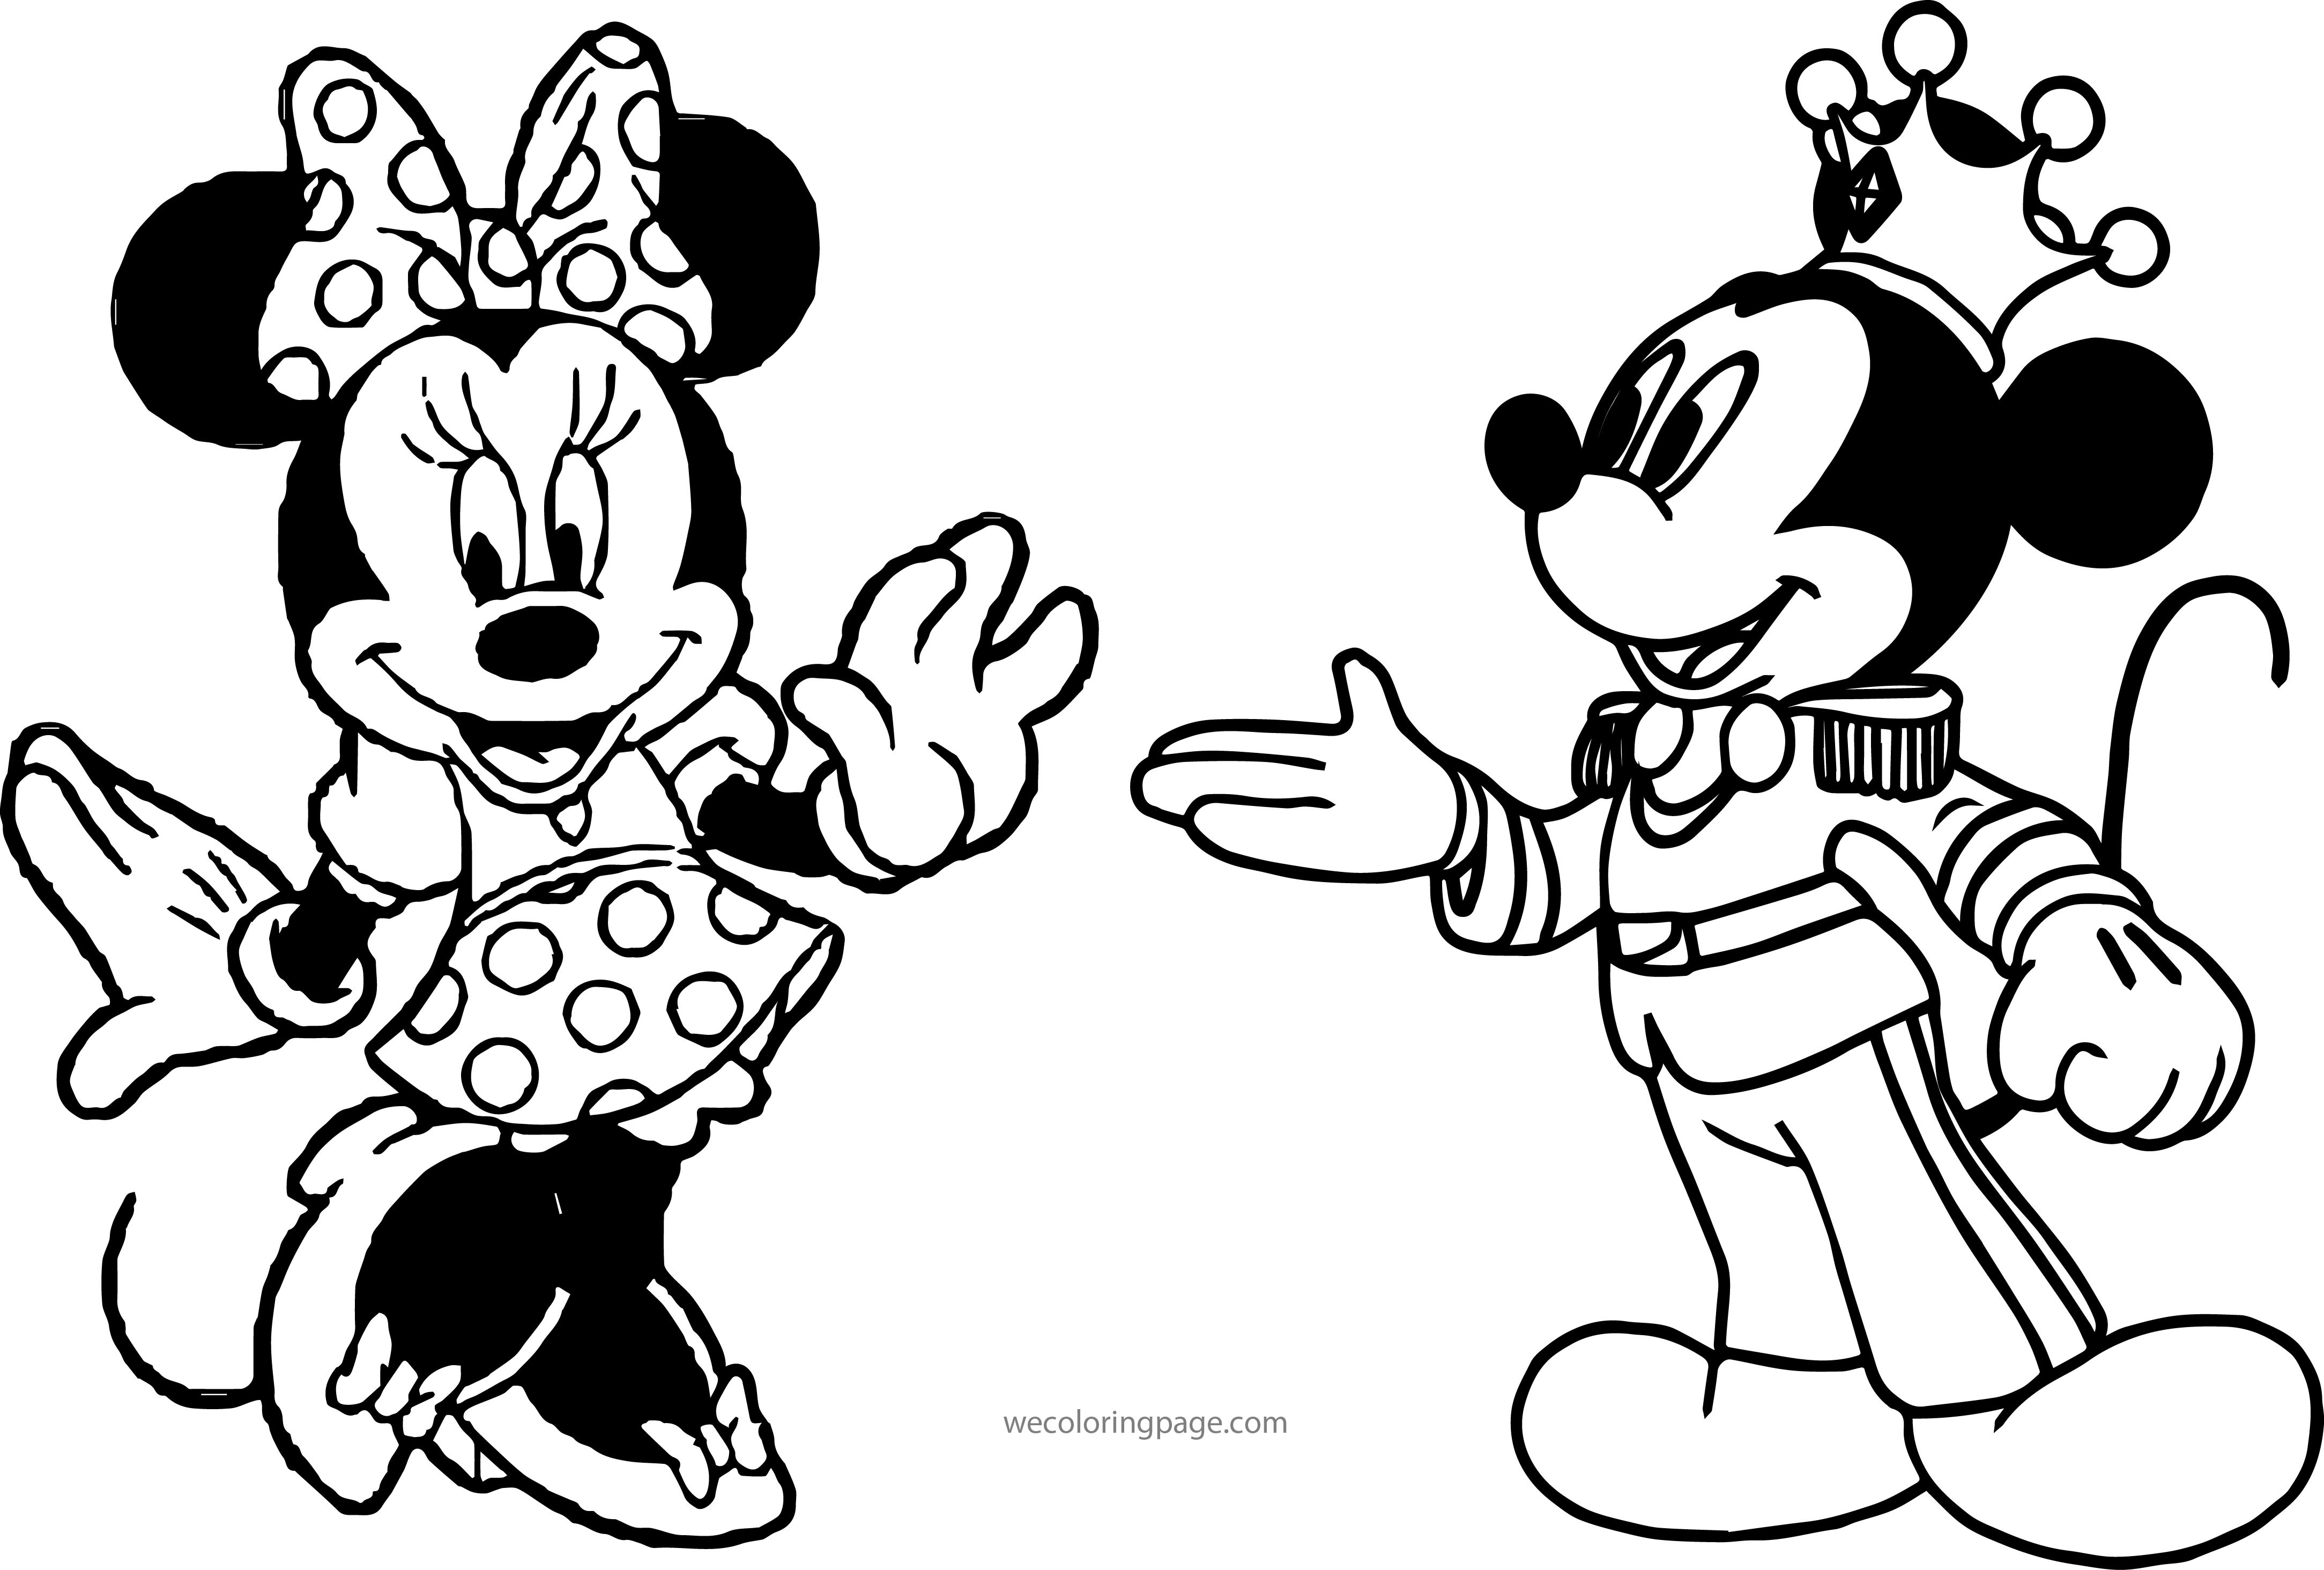 Mickey And Minnie Mouse Kissing Coloring Pages_ at GetColorings.com